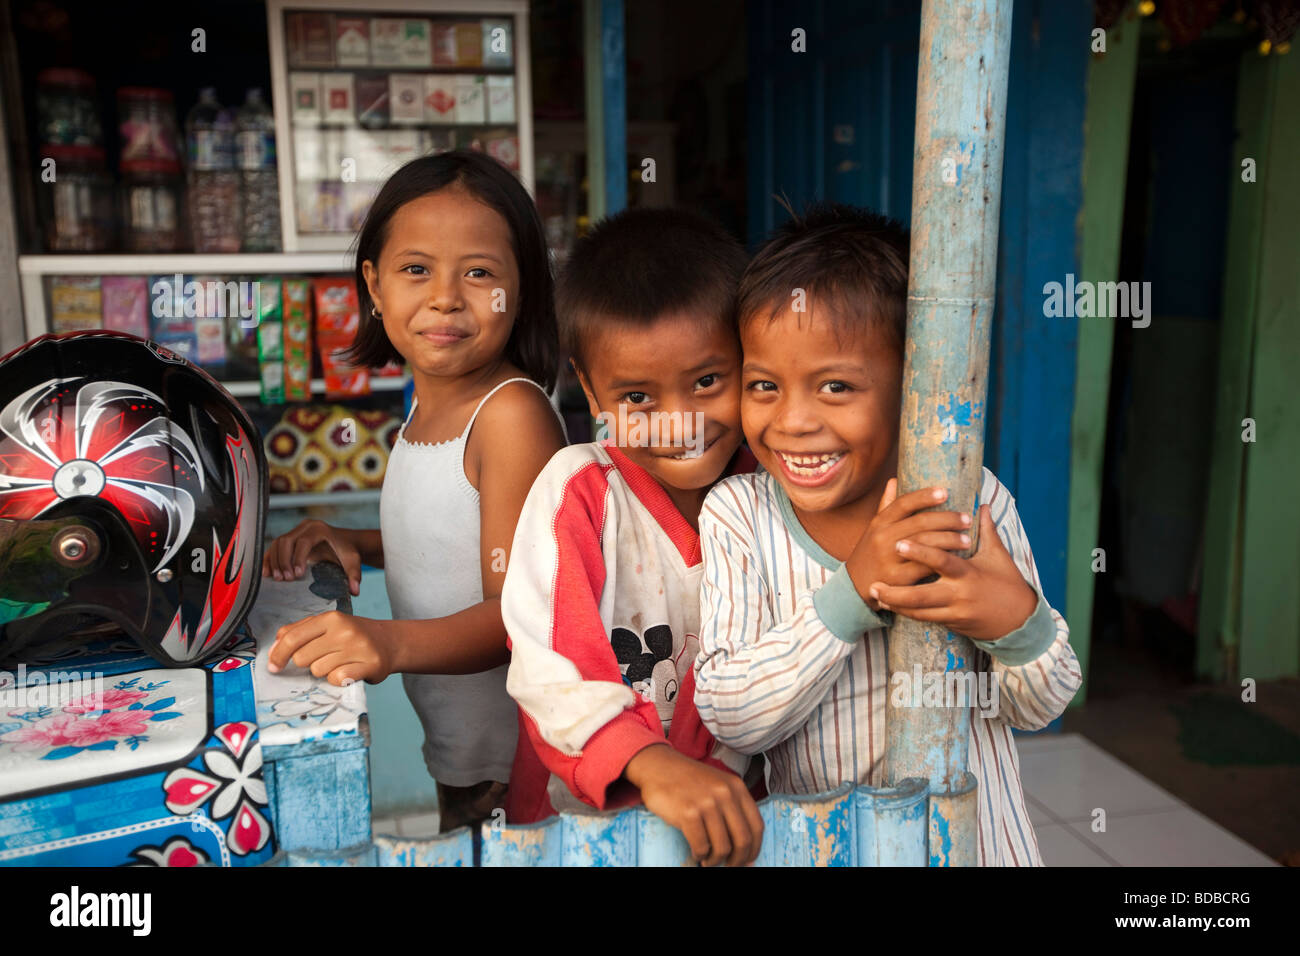 Indonesia Sulawesi West Coast Pare Pare children in doorway of Café Ono seafront bar Stock Photo